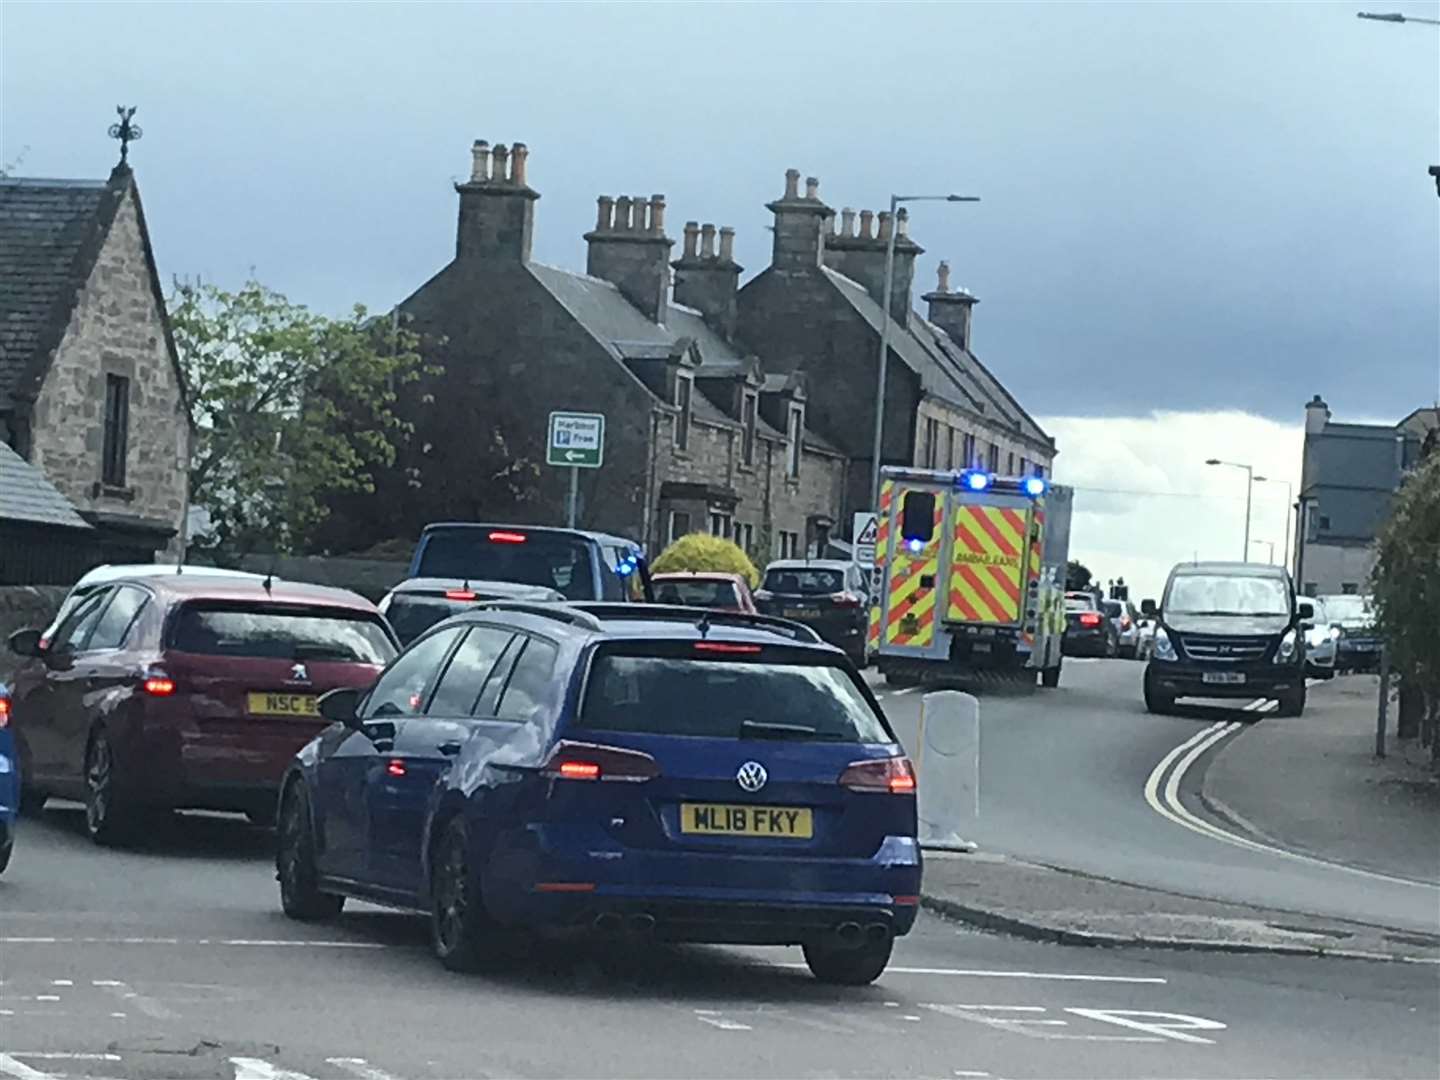 Traffic congestion in Nairn is a long-standing problem.